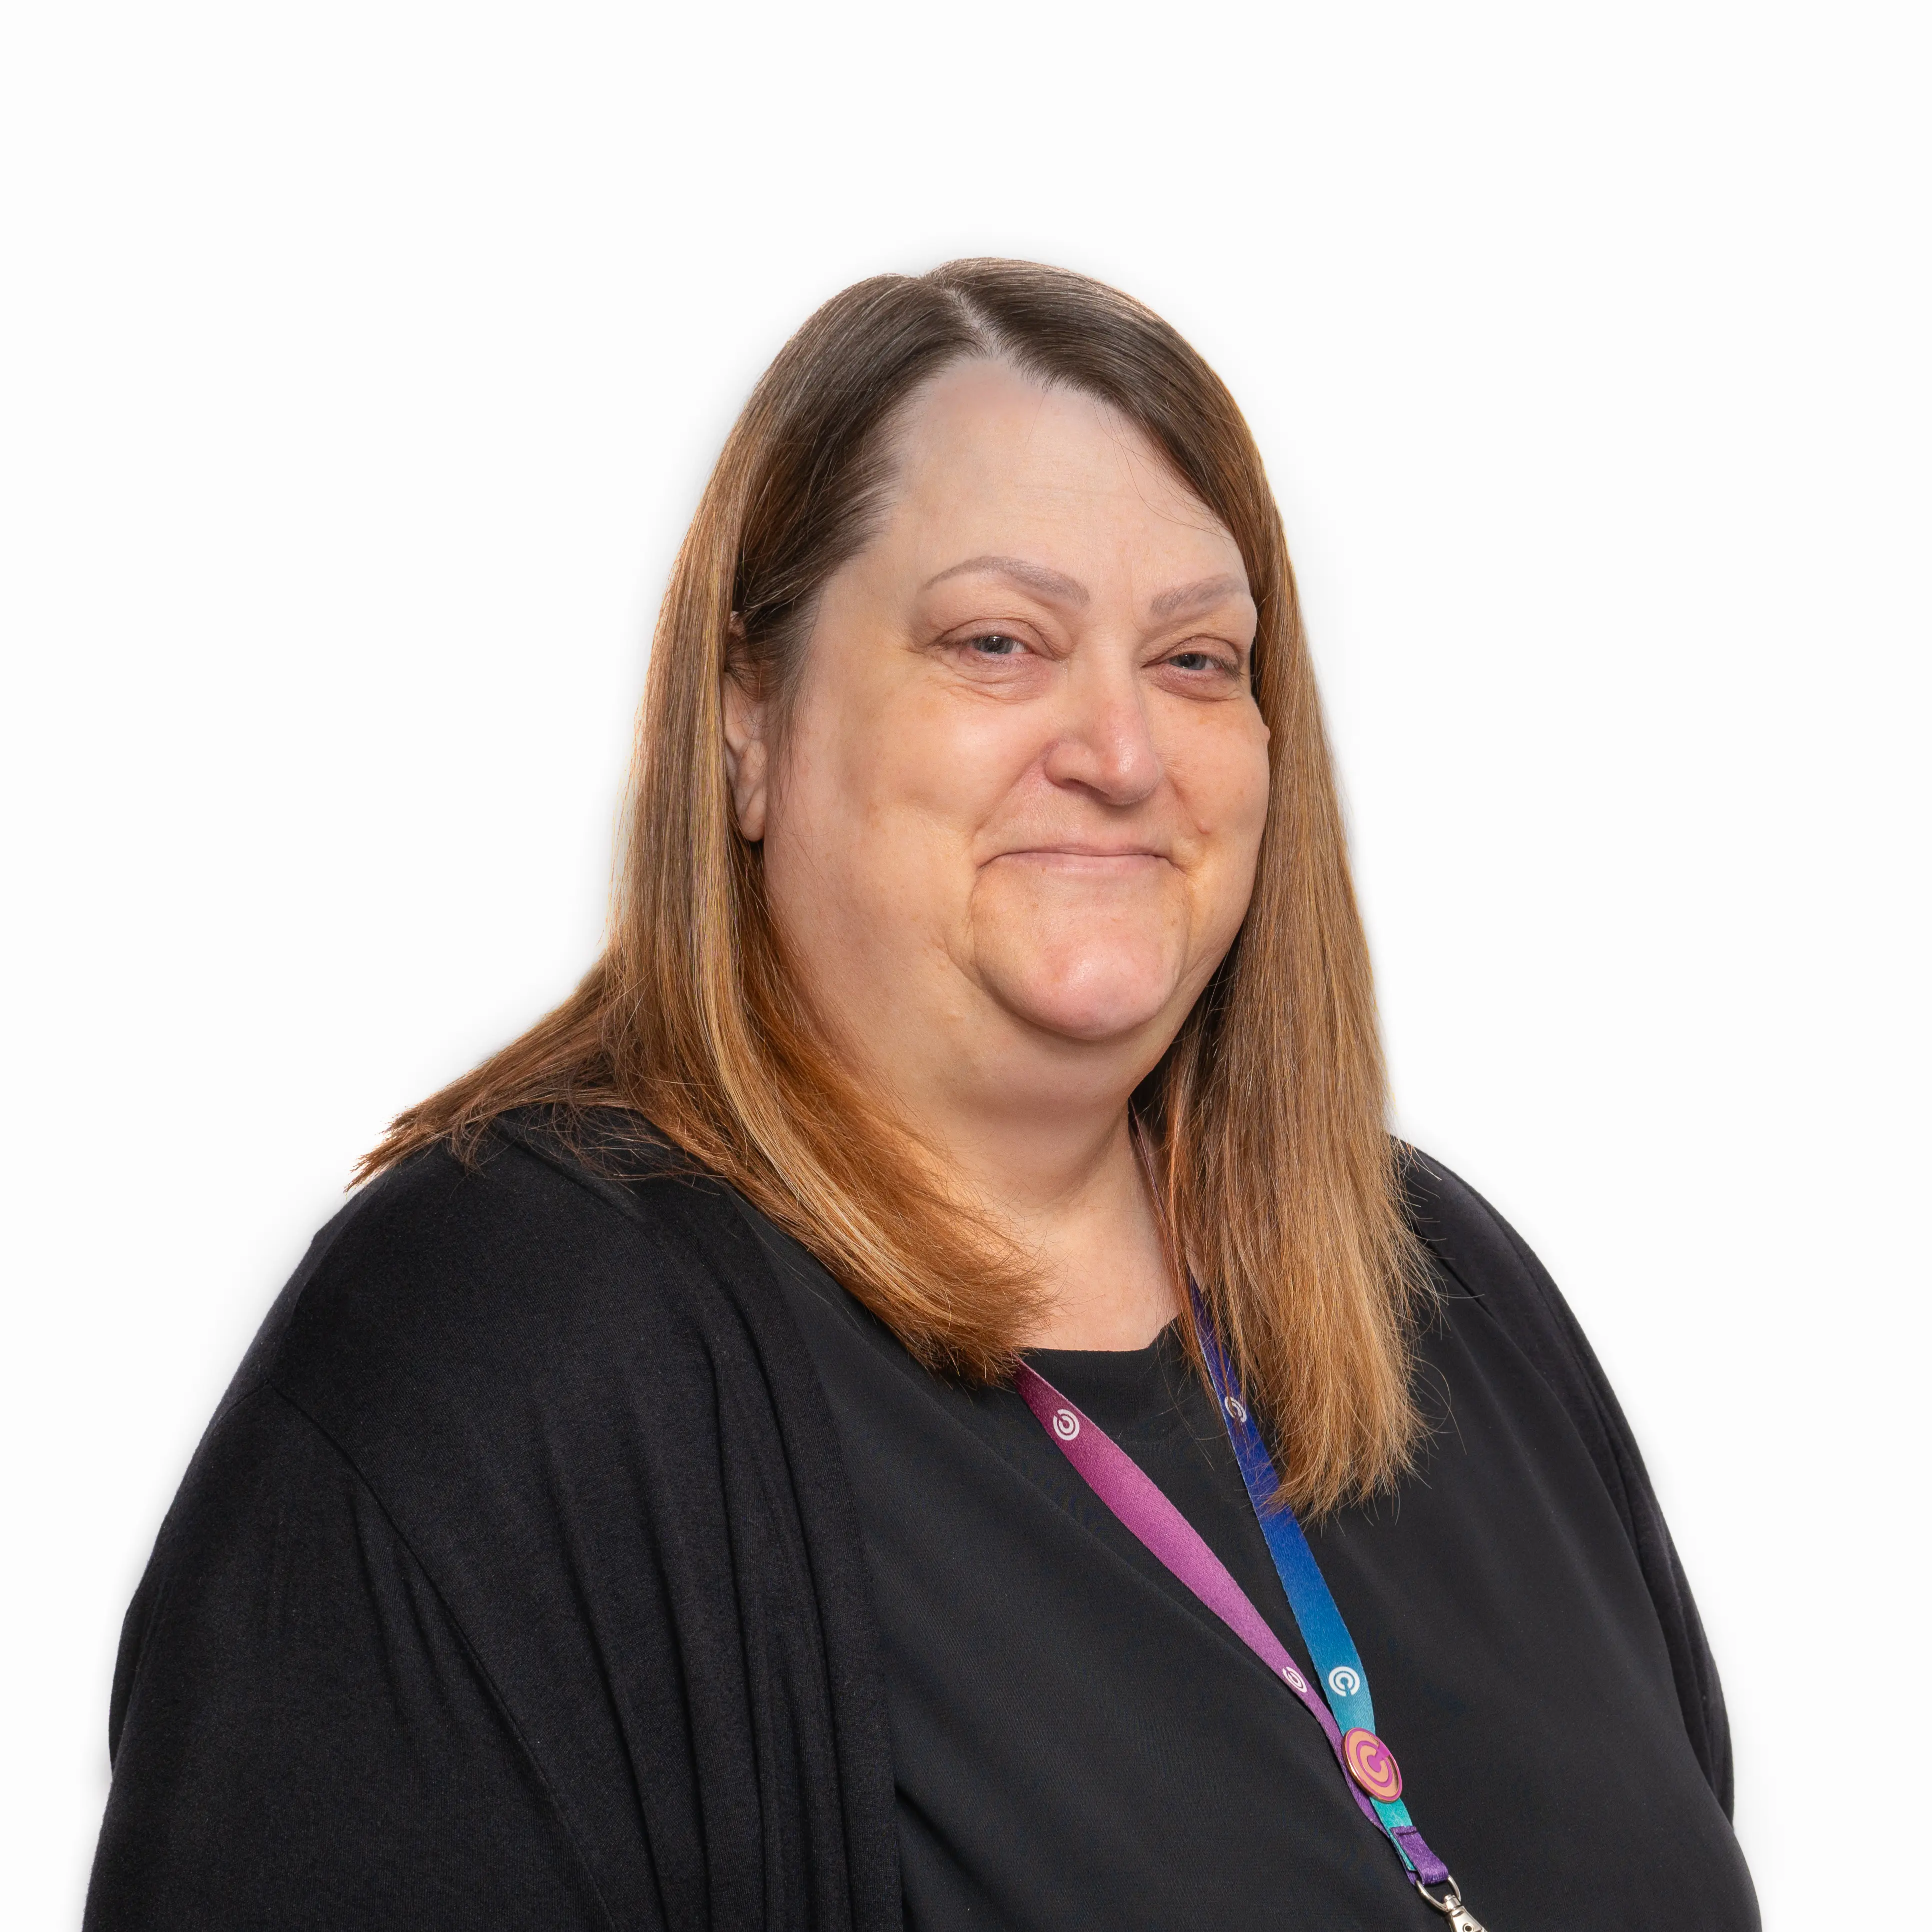 Image of Sharron Burgess managing director at Compassionate Care Group